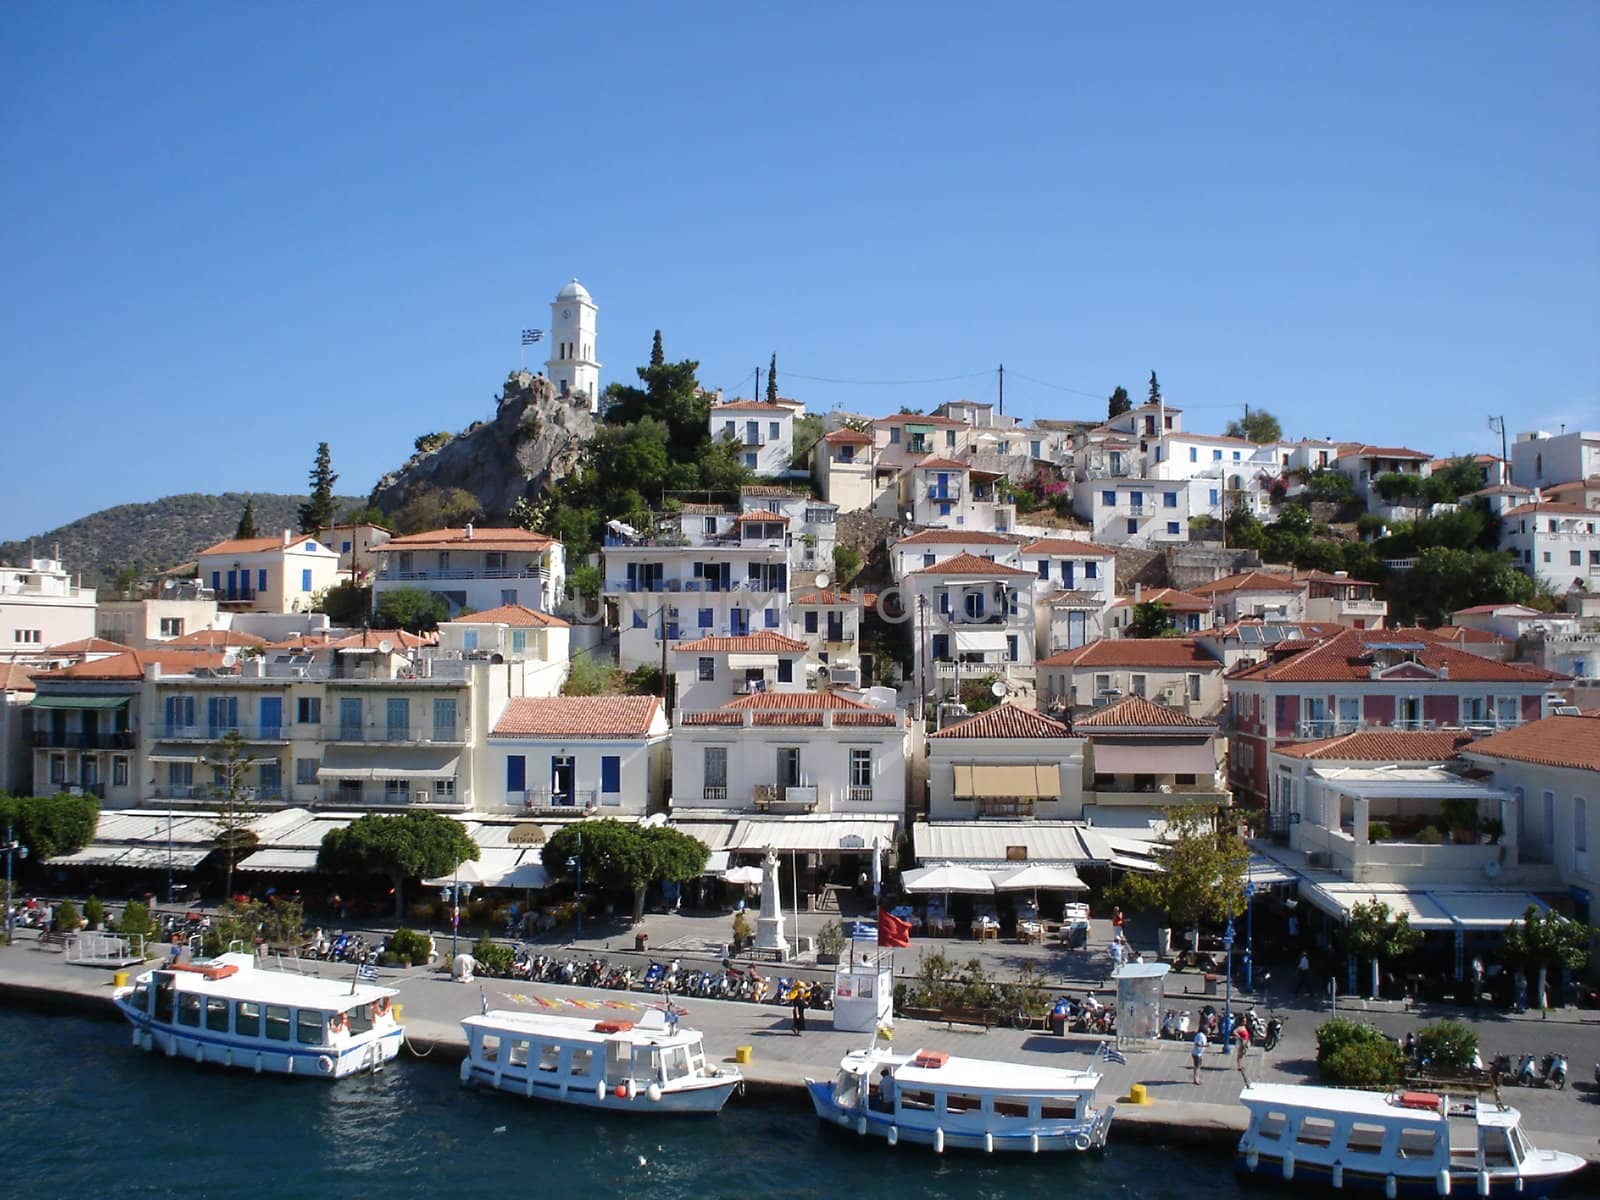 Heart of Poros town by mulden